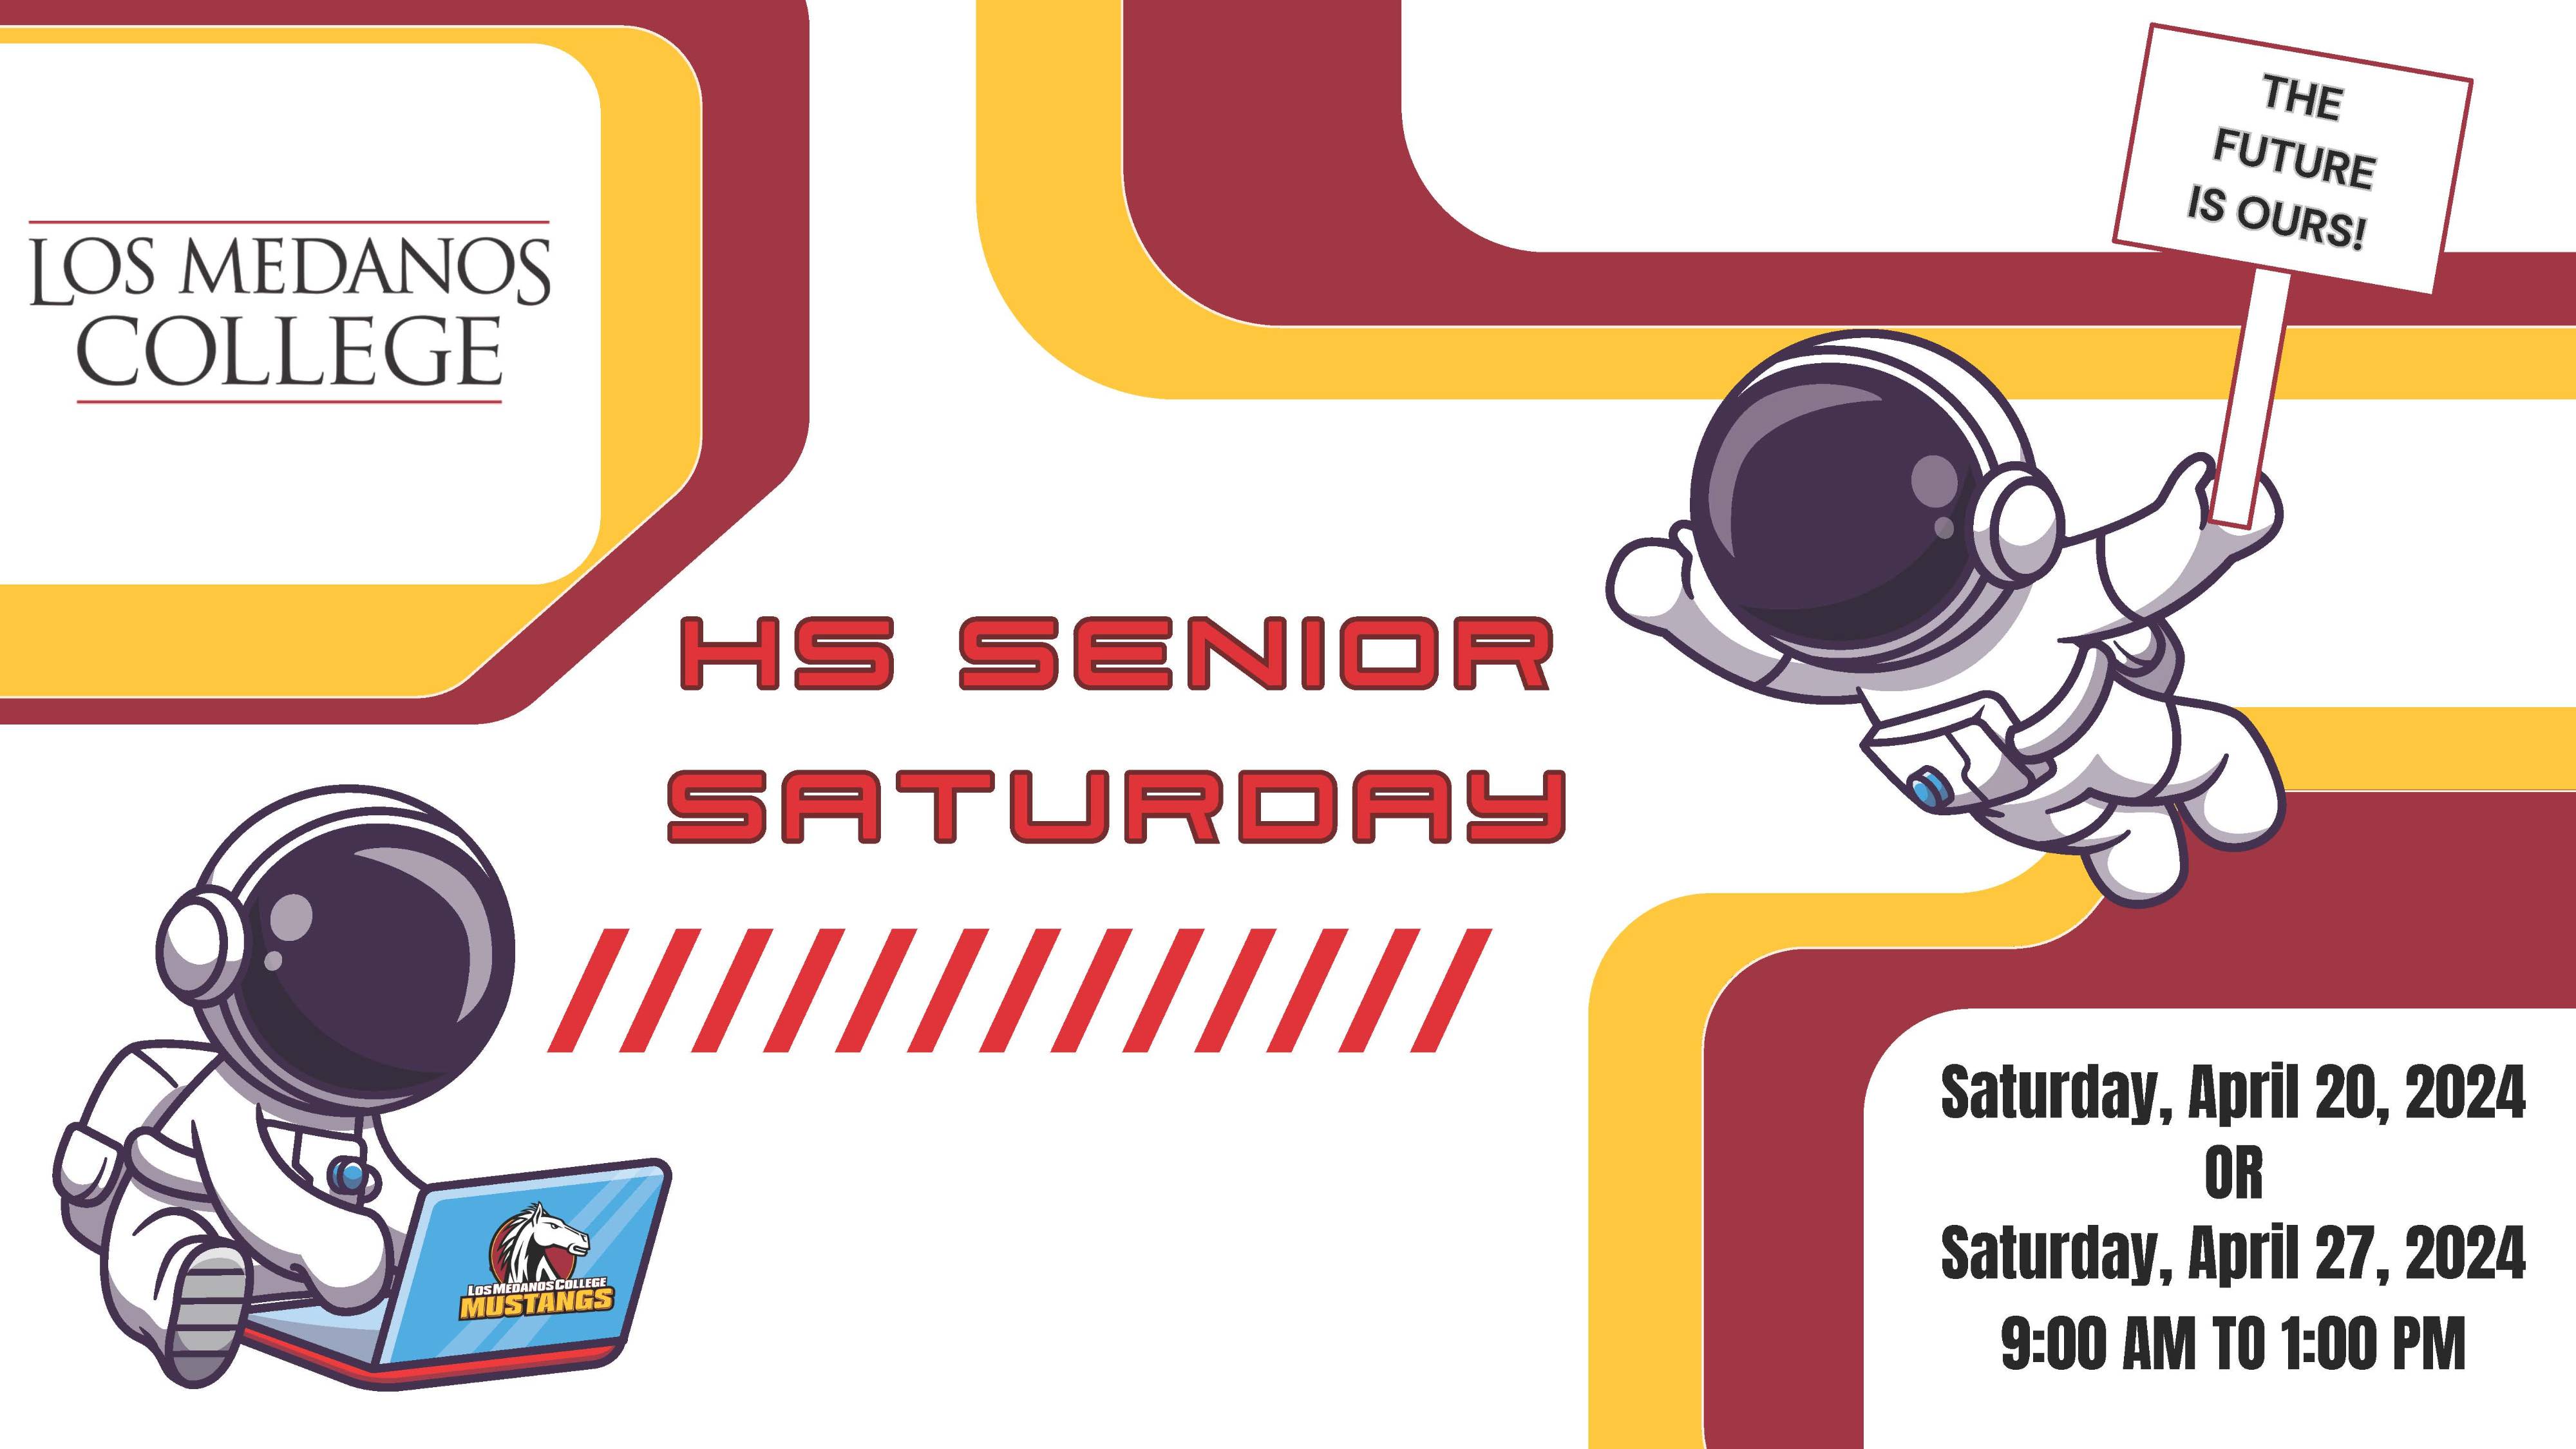 High School Senior Saturday - The Future is Ours!